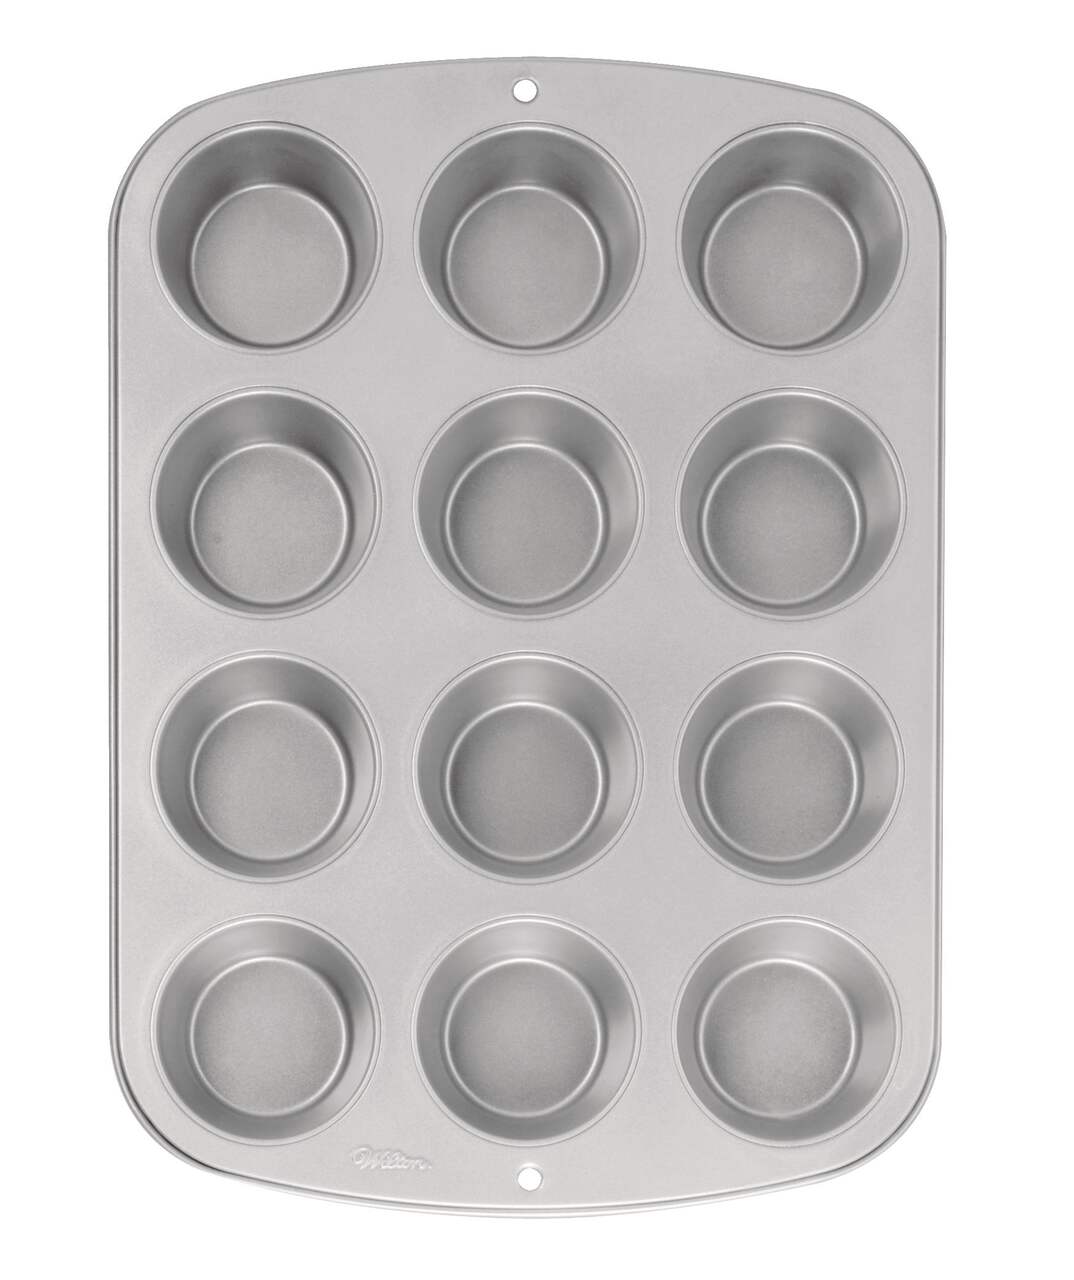 https://media-www.canadiantire.ca/product/living/kitchen/party-city-bakeware/8430057/recipe-right-mini-muffin-pan-47b96b64-2b42-4474-9151-45e1729baf6f-jpgrendition.jpg?imdensity=1&imwidth=1244&impolicy=mZoom